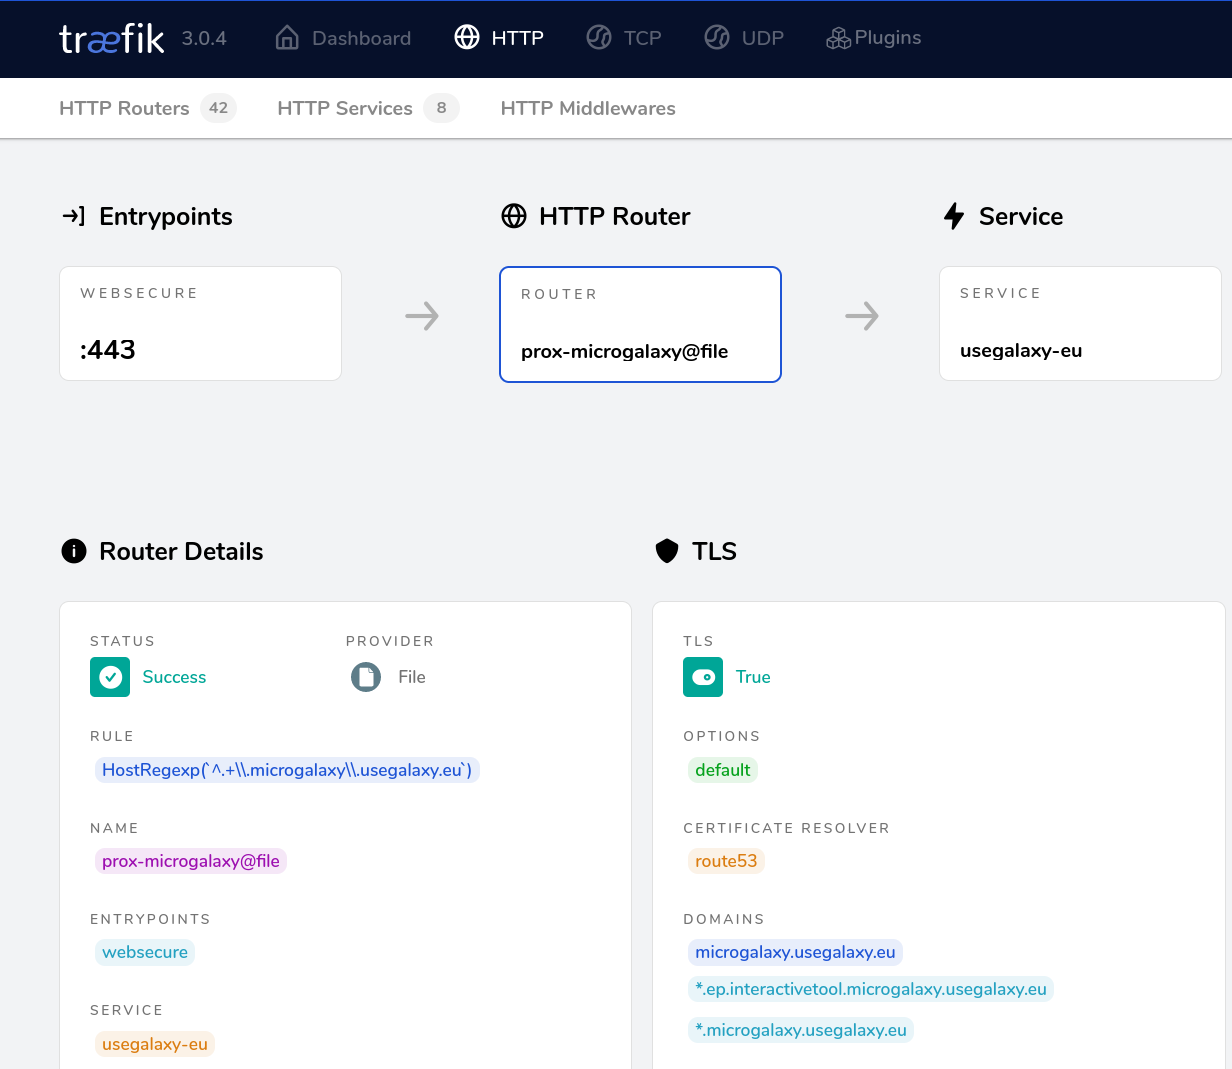 traefik dashboard showing that the router appeared